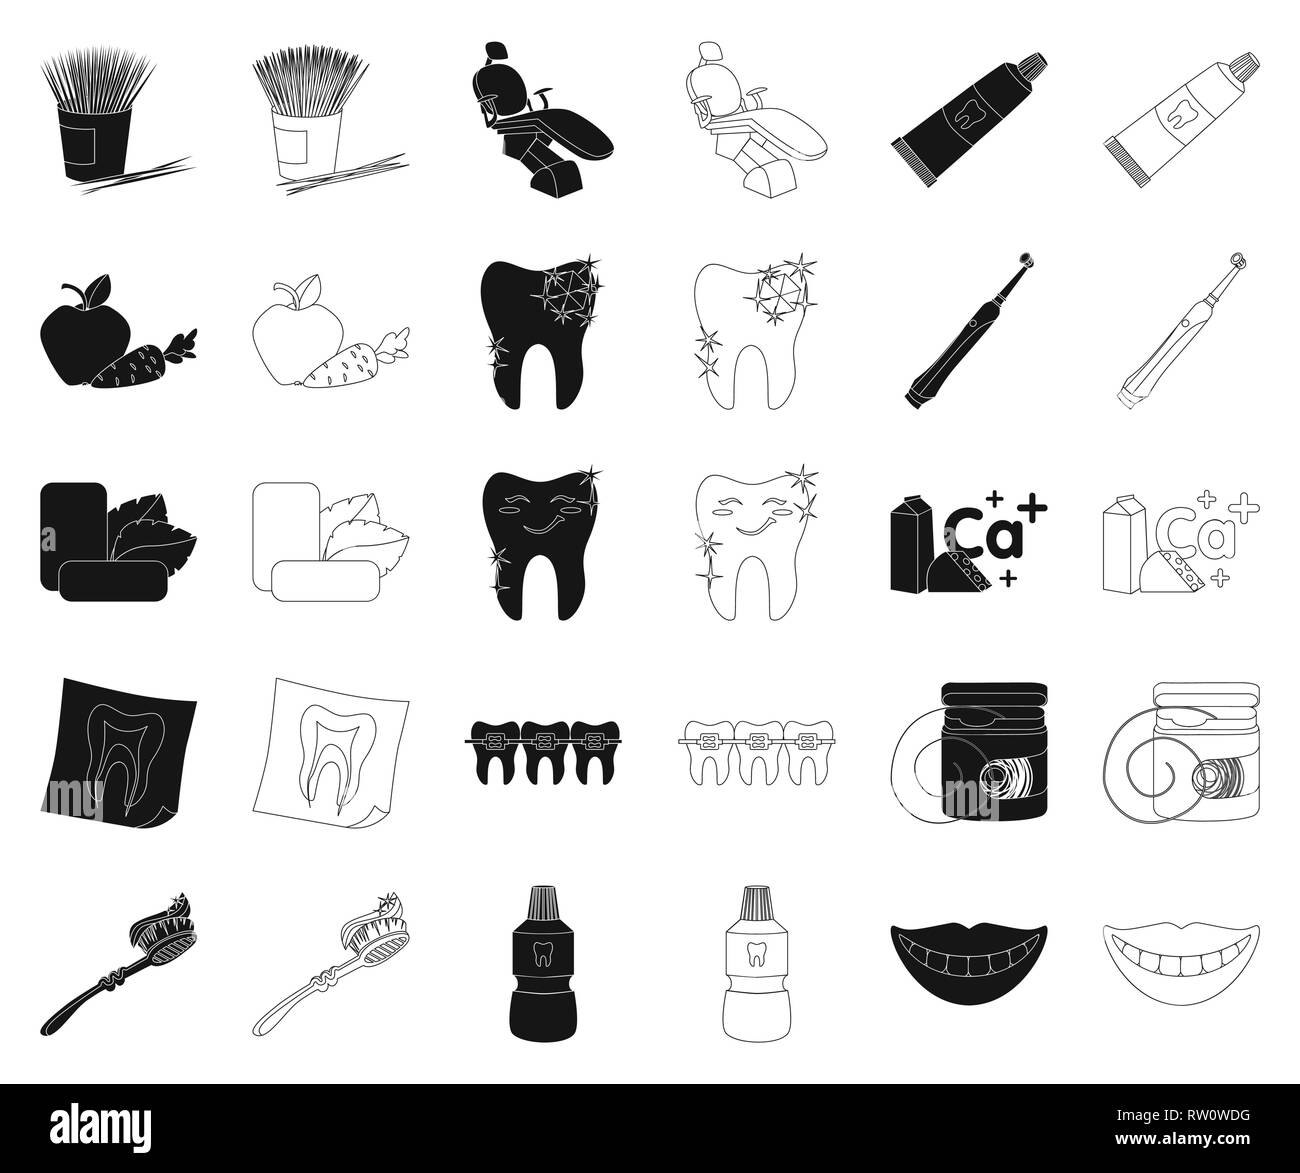 adaptation,apple,art,black,outline,bottle,braces,calcium,care,carrot,chair,chewing,clinic,collection,dental,dentist,dentistry,design,diamond,doctor,electric,equipment,floss,gum,hygiene,icon,illustration,instrument,isolated,logo,medicine,mouthwash,ray,set,sign,smile,smiling,sources,symbol,teeth,tooth,toothbrush,toothpaste,toothpick,treatment,vector,web,white,x Vector Vectors , Stock Vector